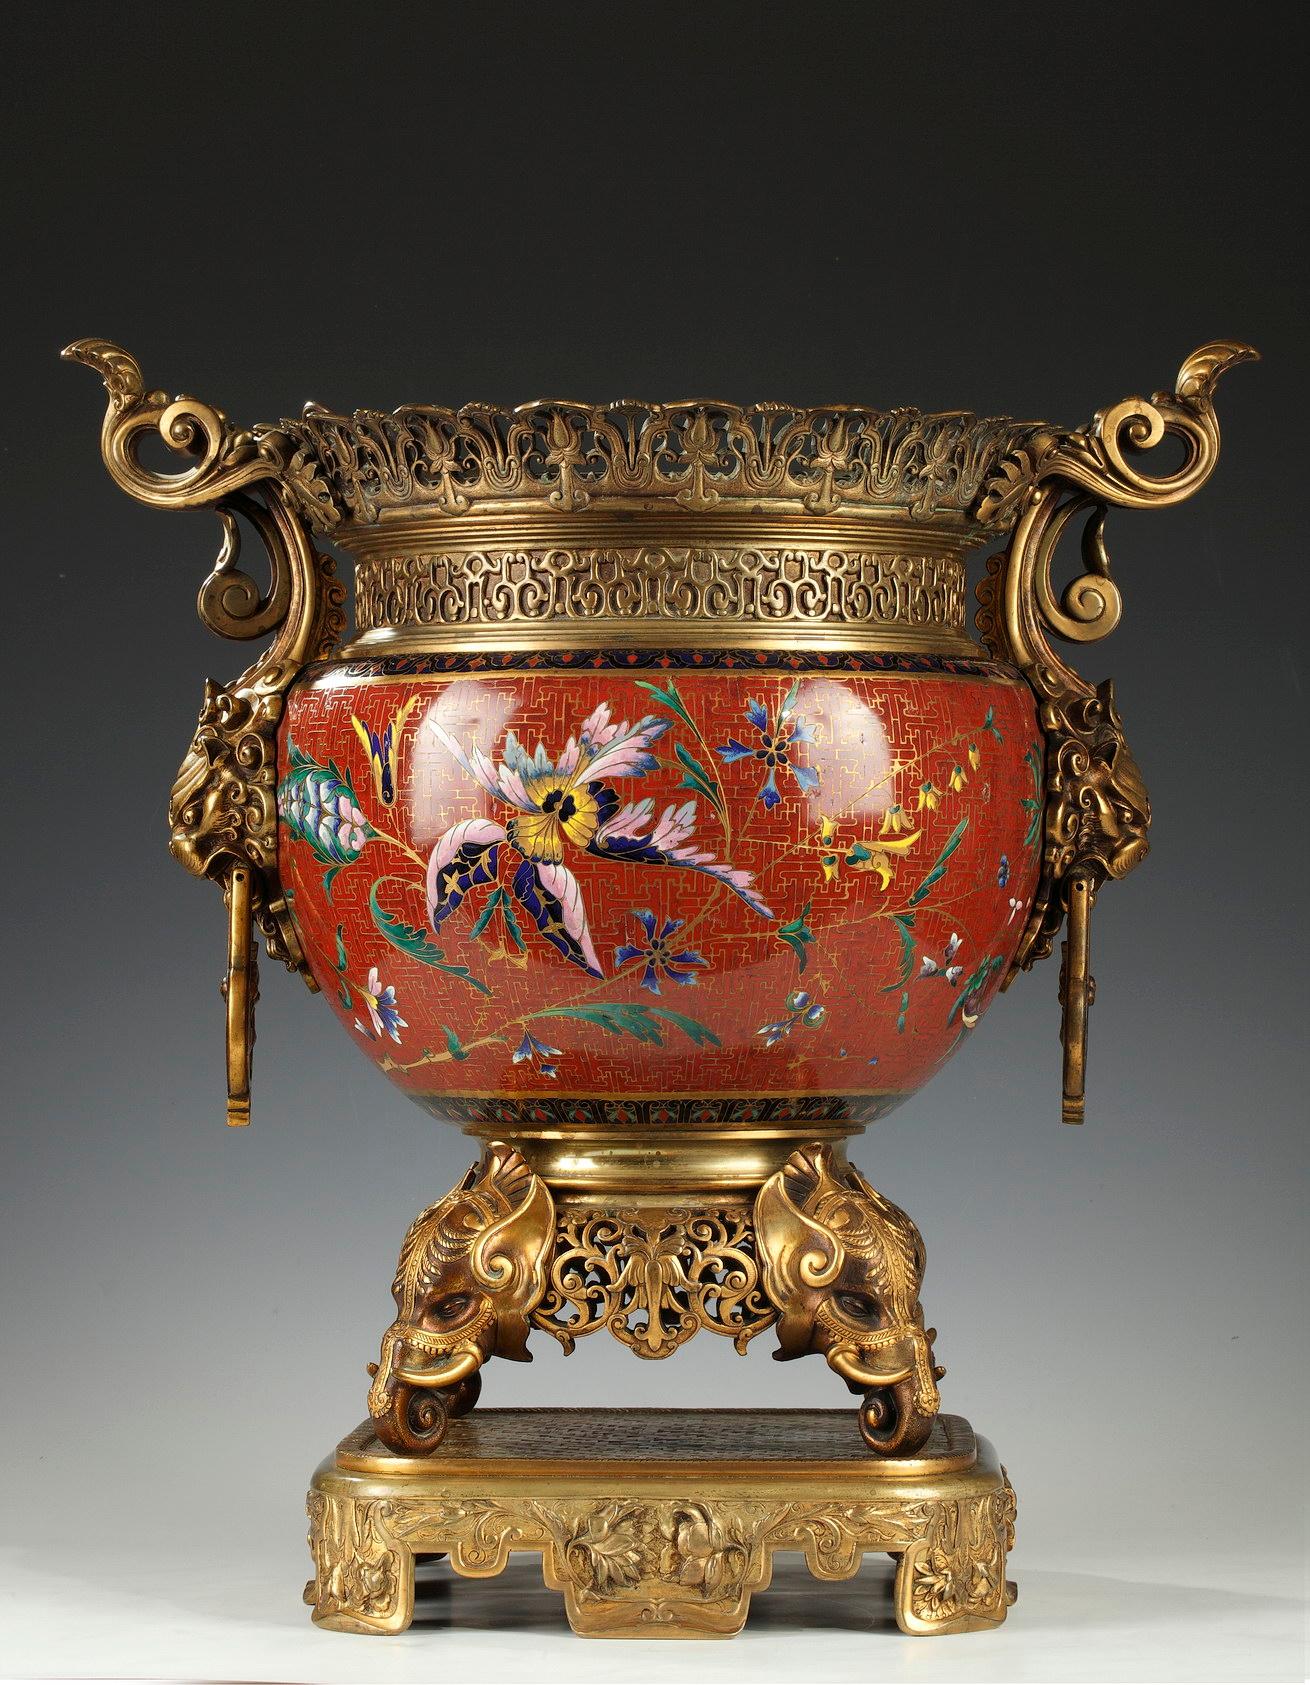 Large planter decorated on the belly with a rotating decoration of polychrome flowers and geometric patterns in cloisonné enamel on a red background. It is inserted in an important patinated and gilded bronze frame composed of openwork friezes on